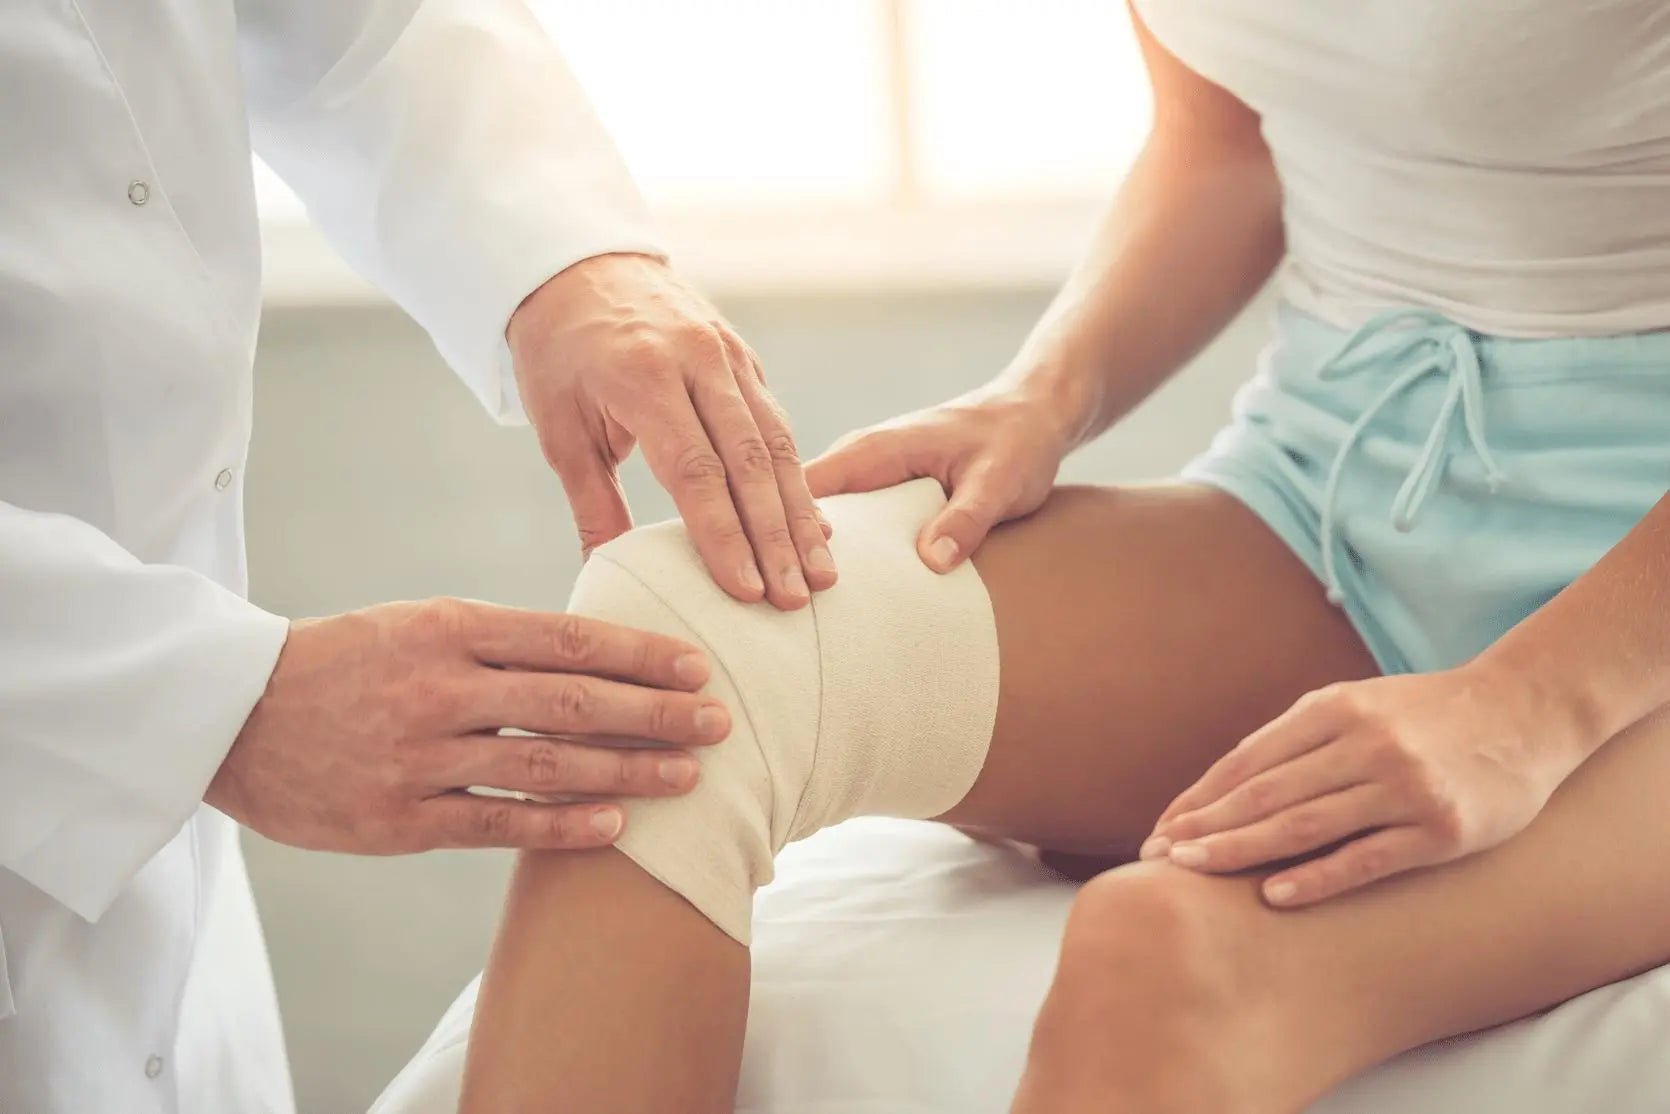 Knee Surgery Recovery: What to Expect and How to Prepare.